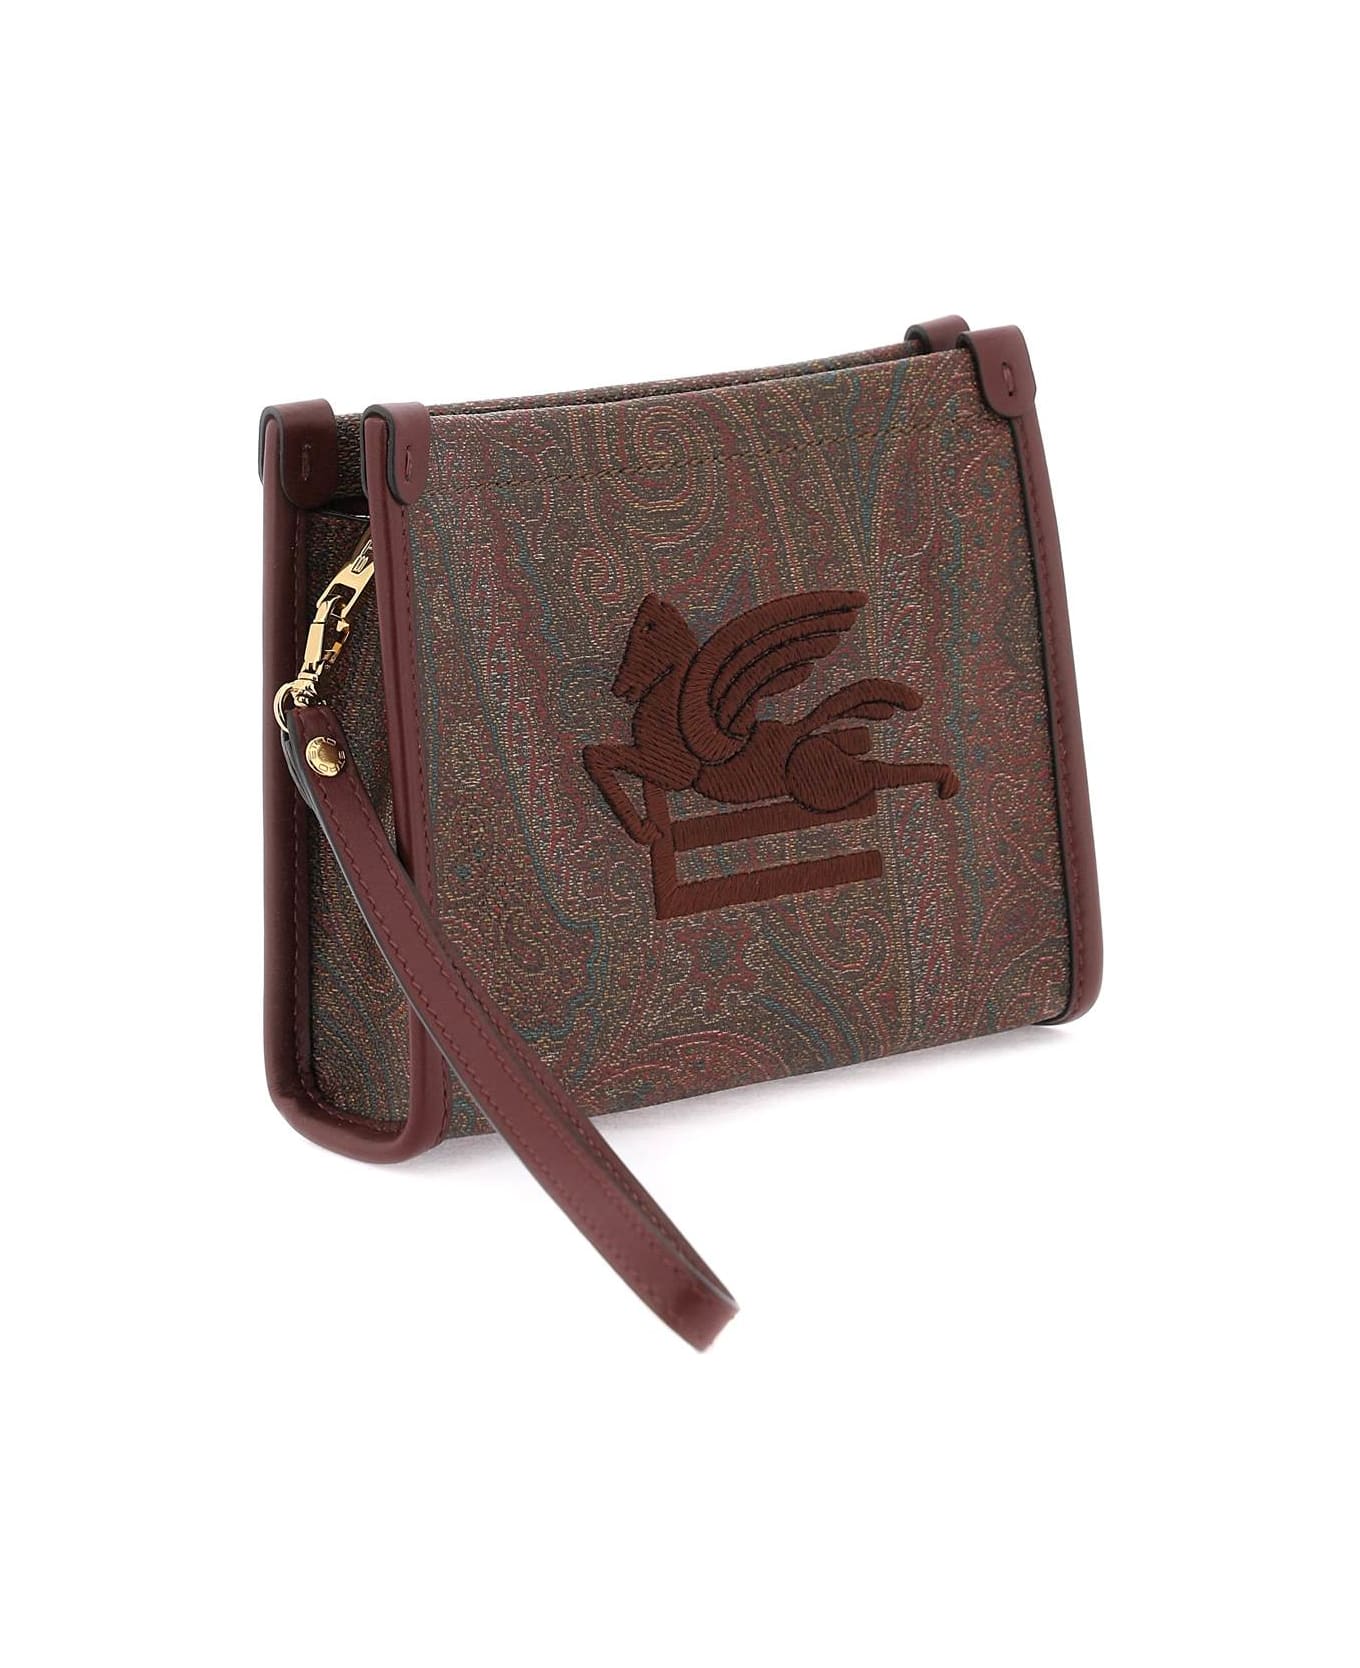 Etro Logo Paisley All-over Print Clutch - Brown